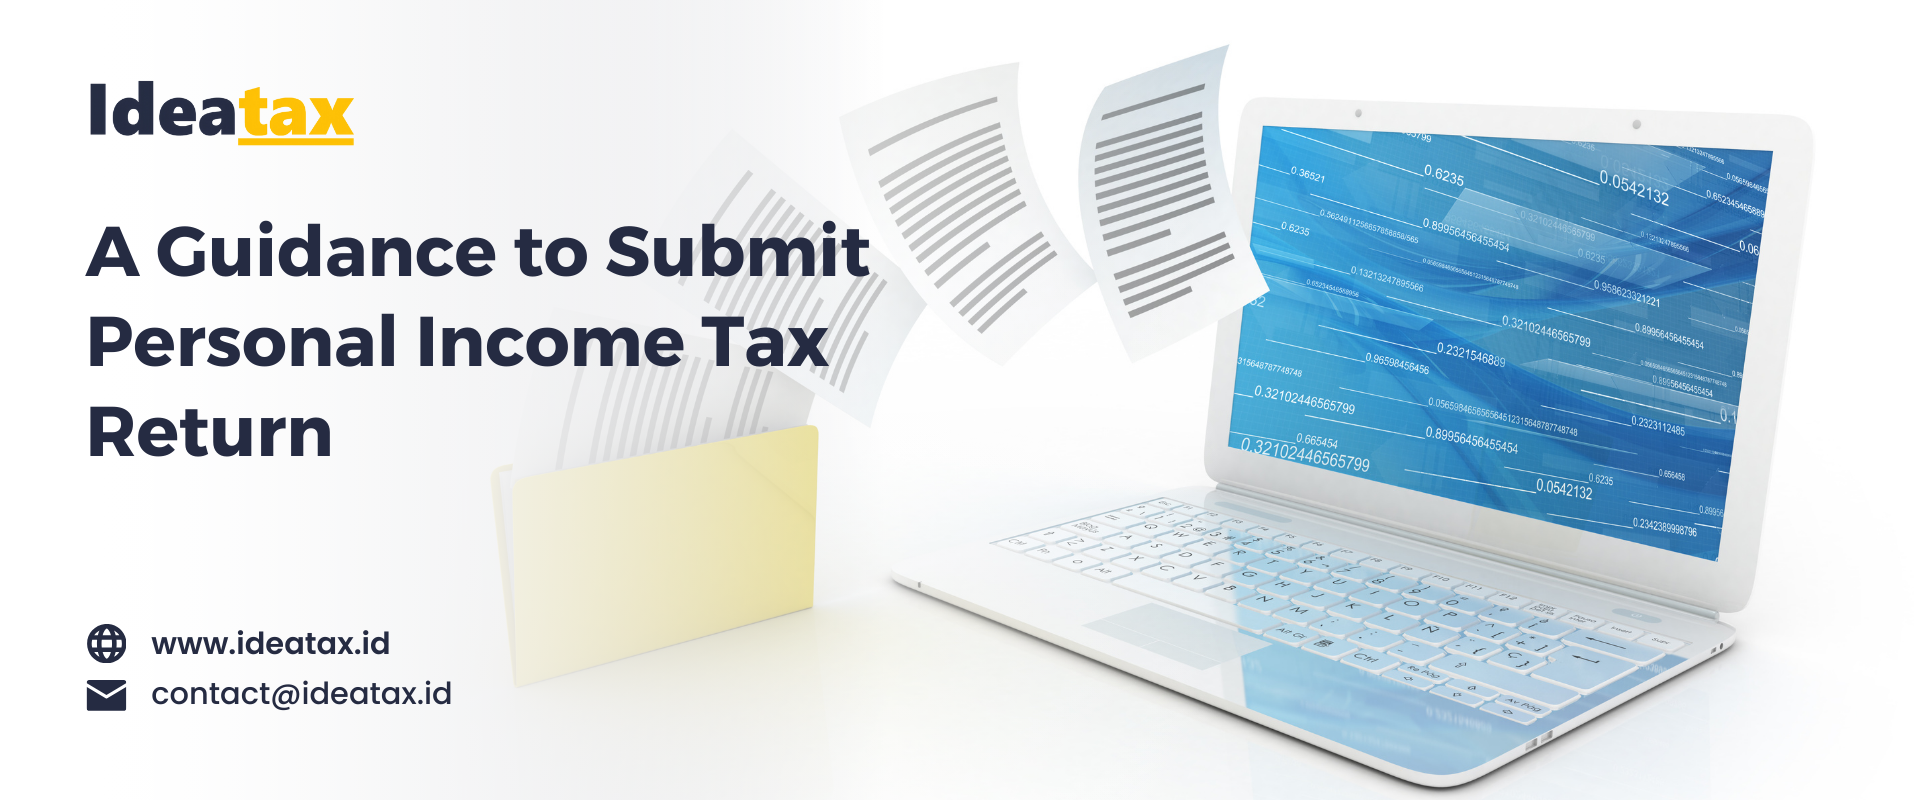 A Guidance to Submit a Personal Income Tax Return